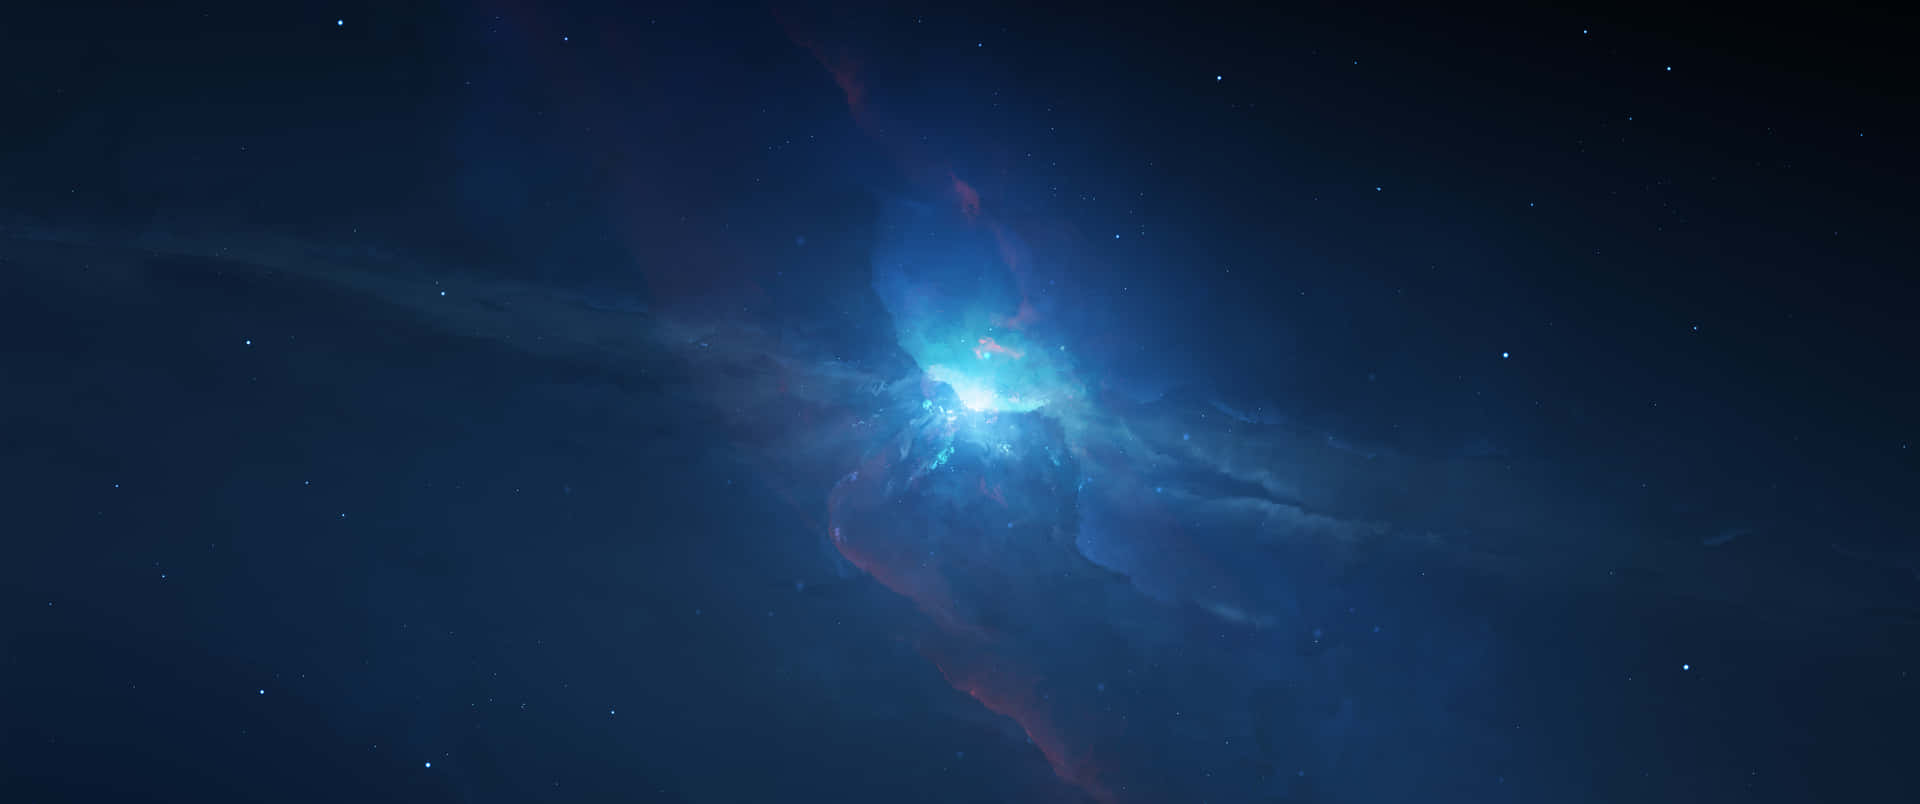 Explore the depths of Space on this 3440x1440 Wallpaper Wallpaper